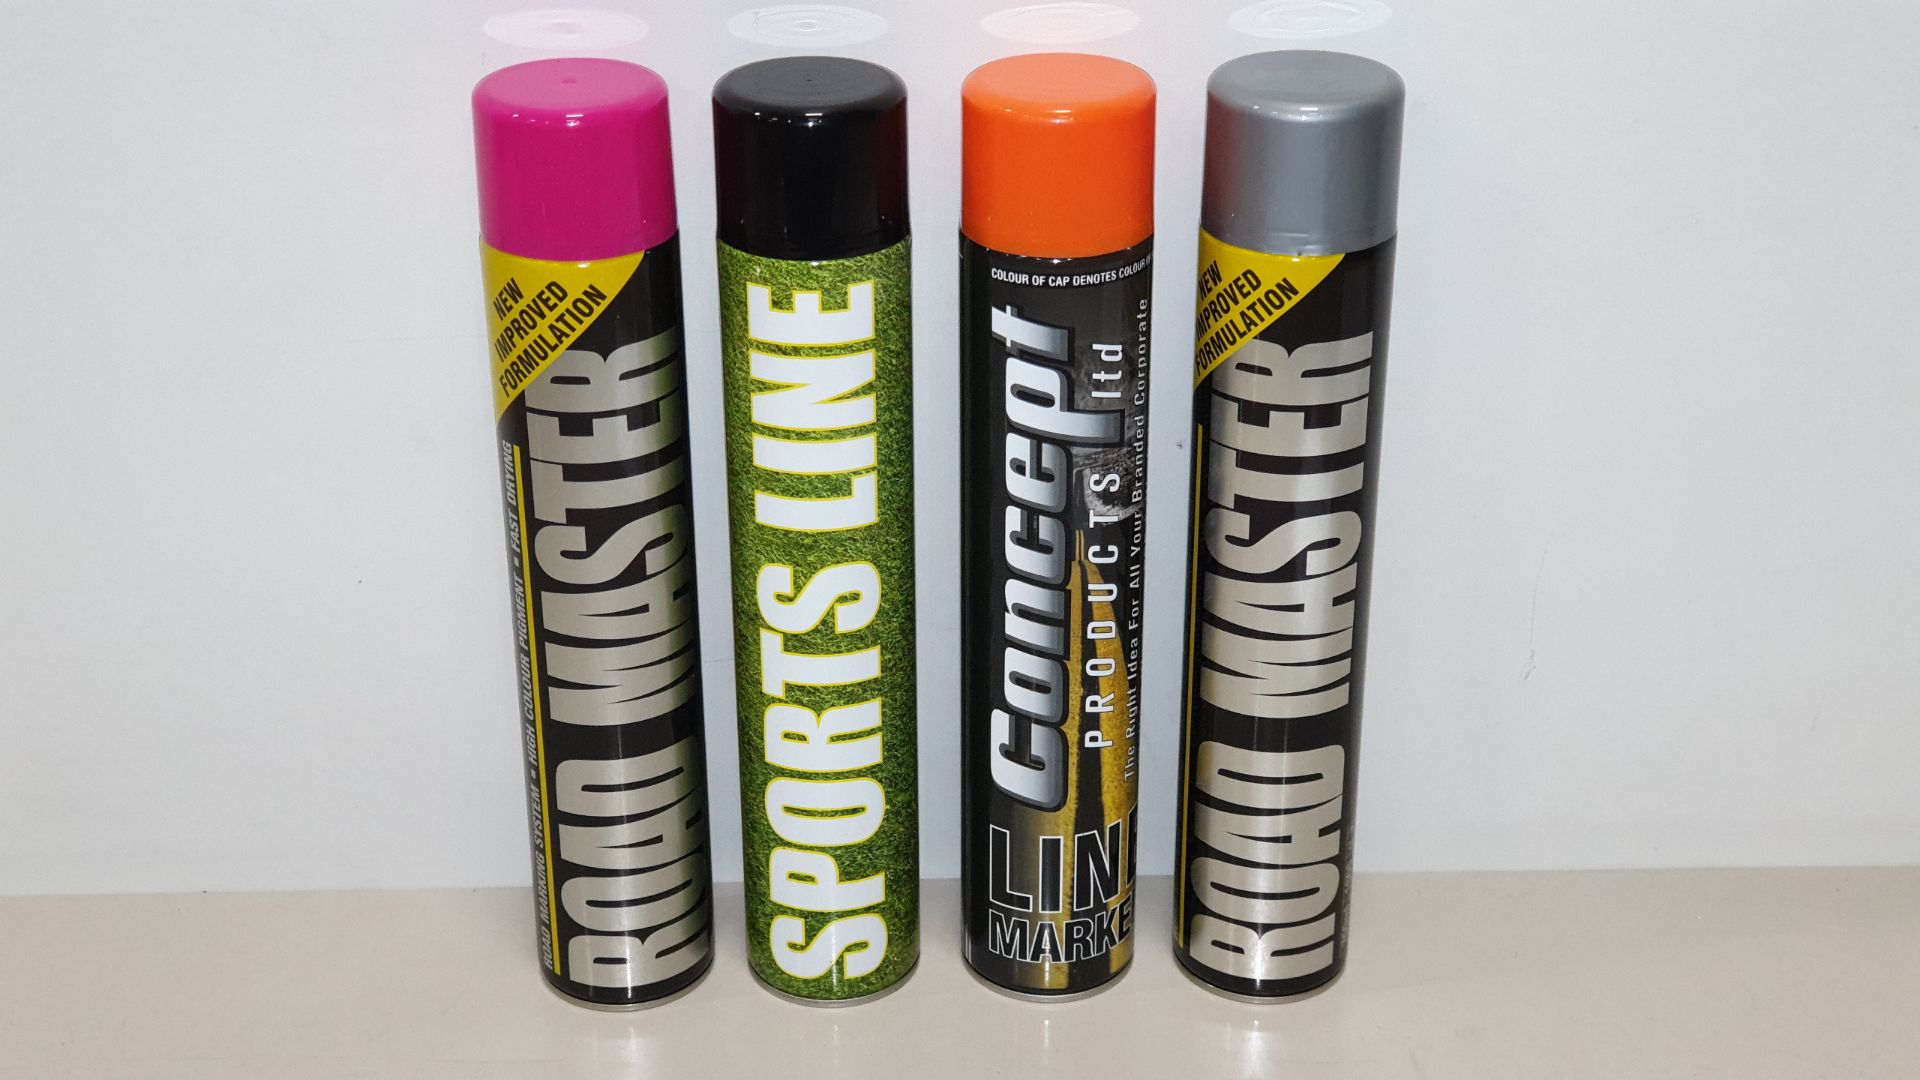 48 X 750ML LINE MARKER PAINT IN 4 DIFFERENT STYLES - CONTAINED IN 4 BOXES